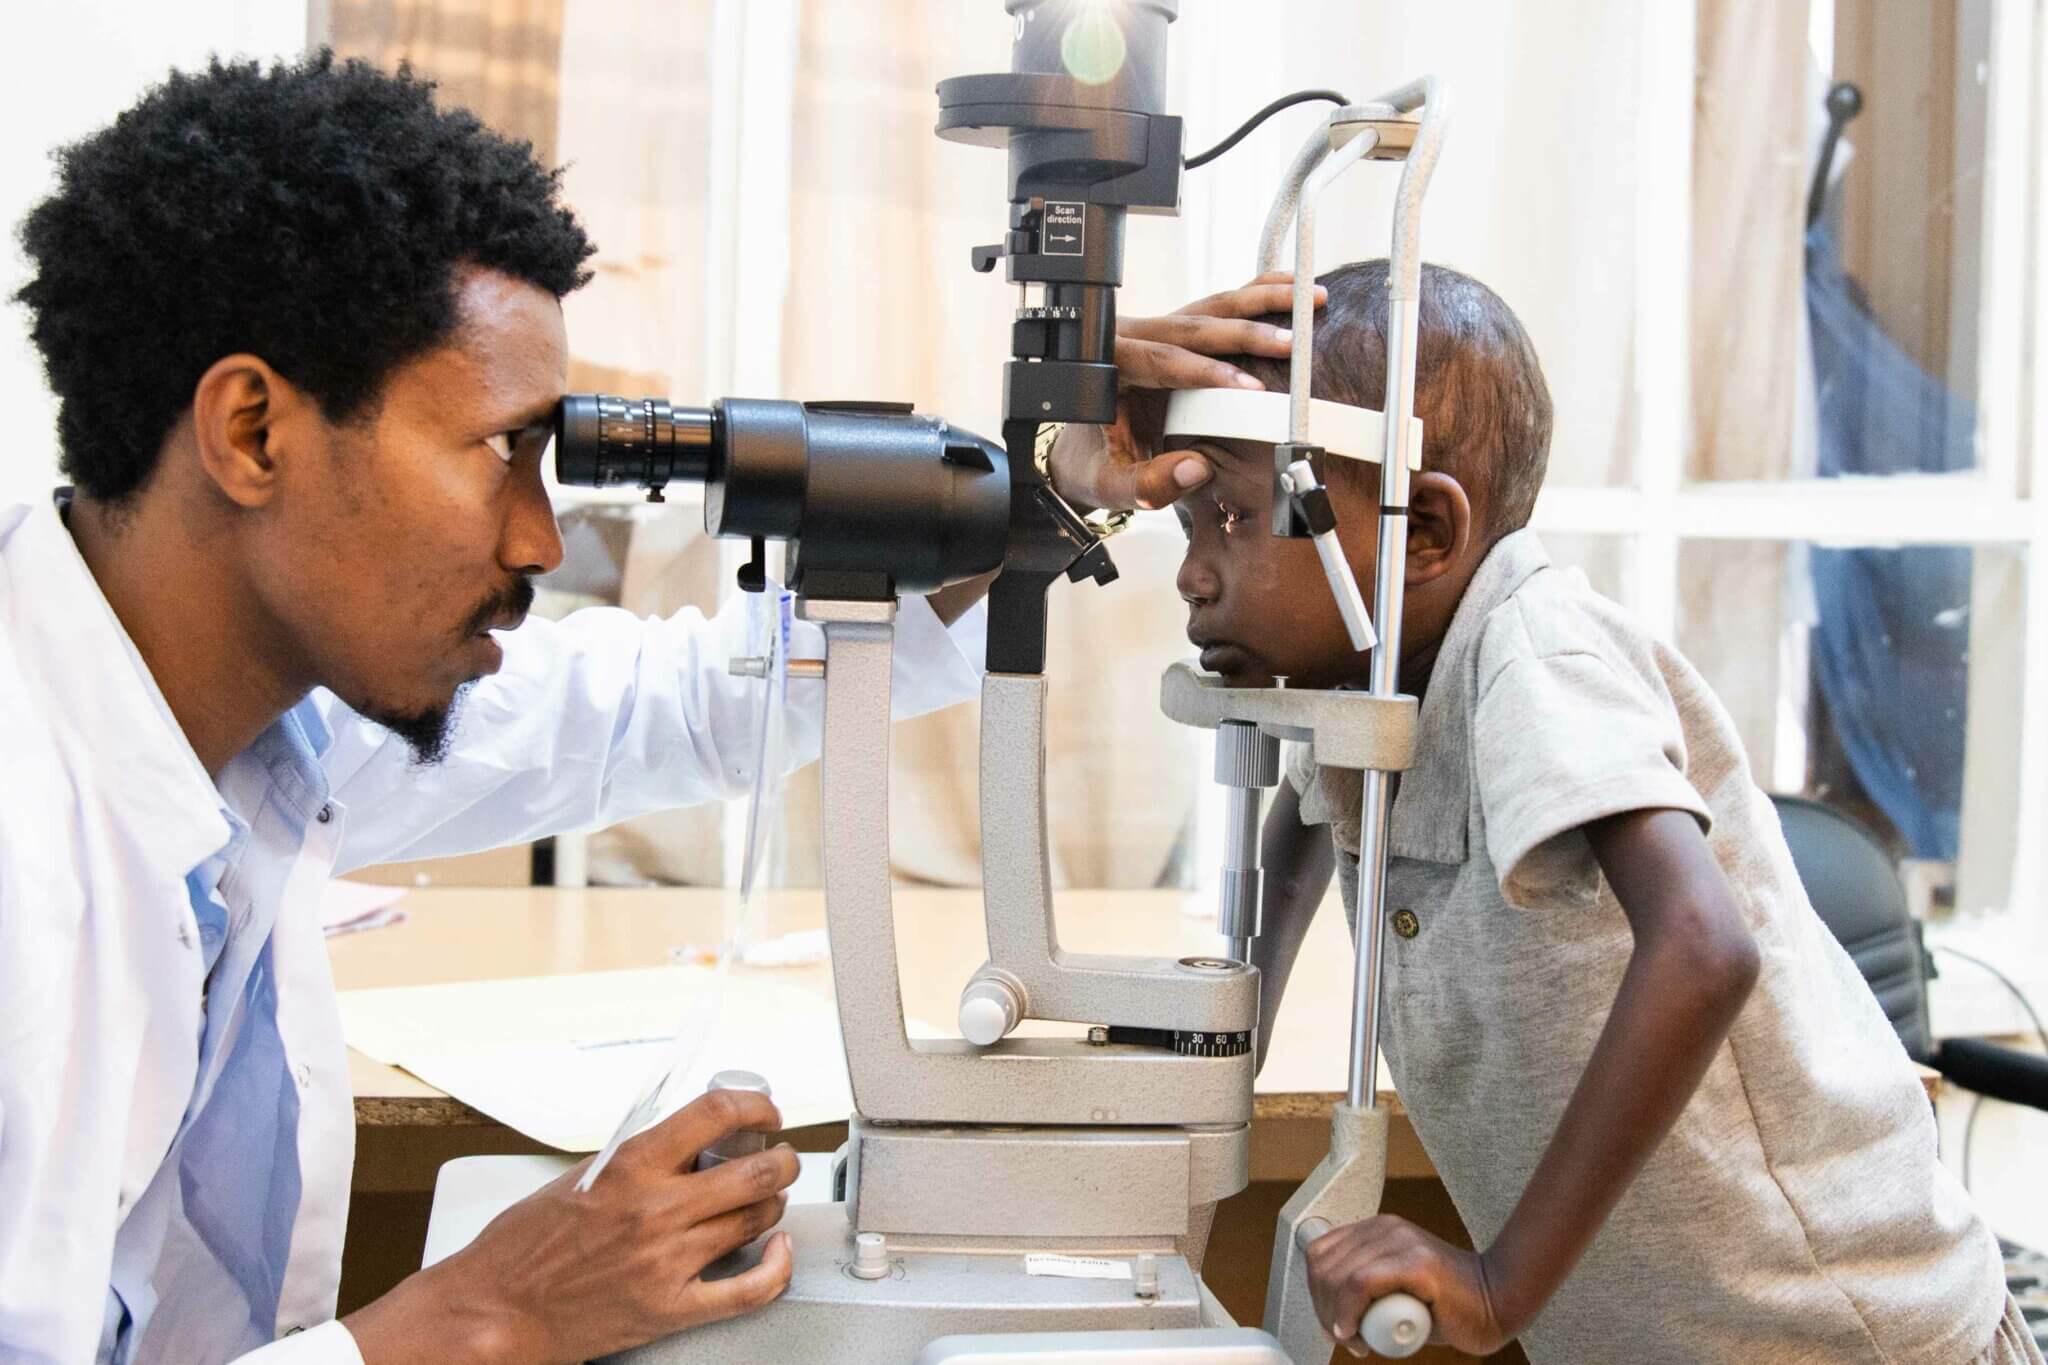 Abel Batira is 10 years old. He lives with his seven older siblings and parents in southern Ethiopia. Abel was diagnosed with vision loss due to Vitamin A deficiency and malnutrition.